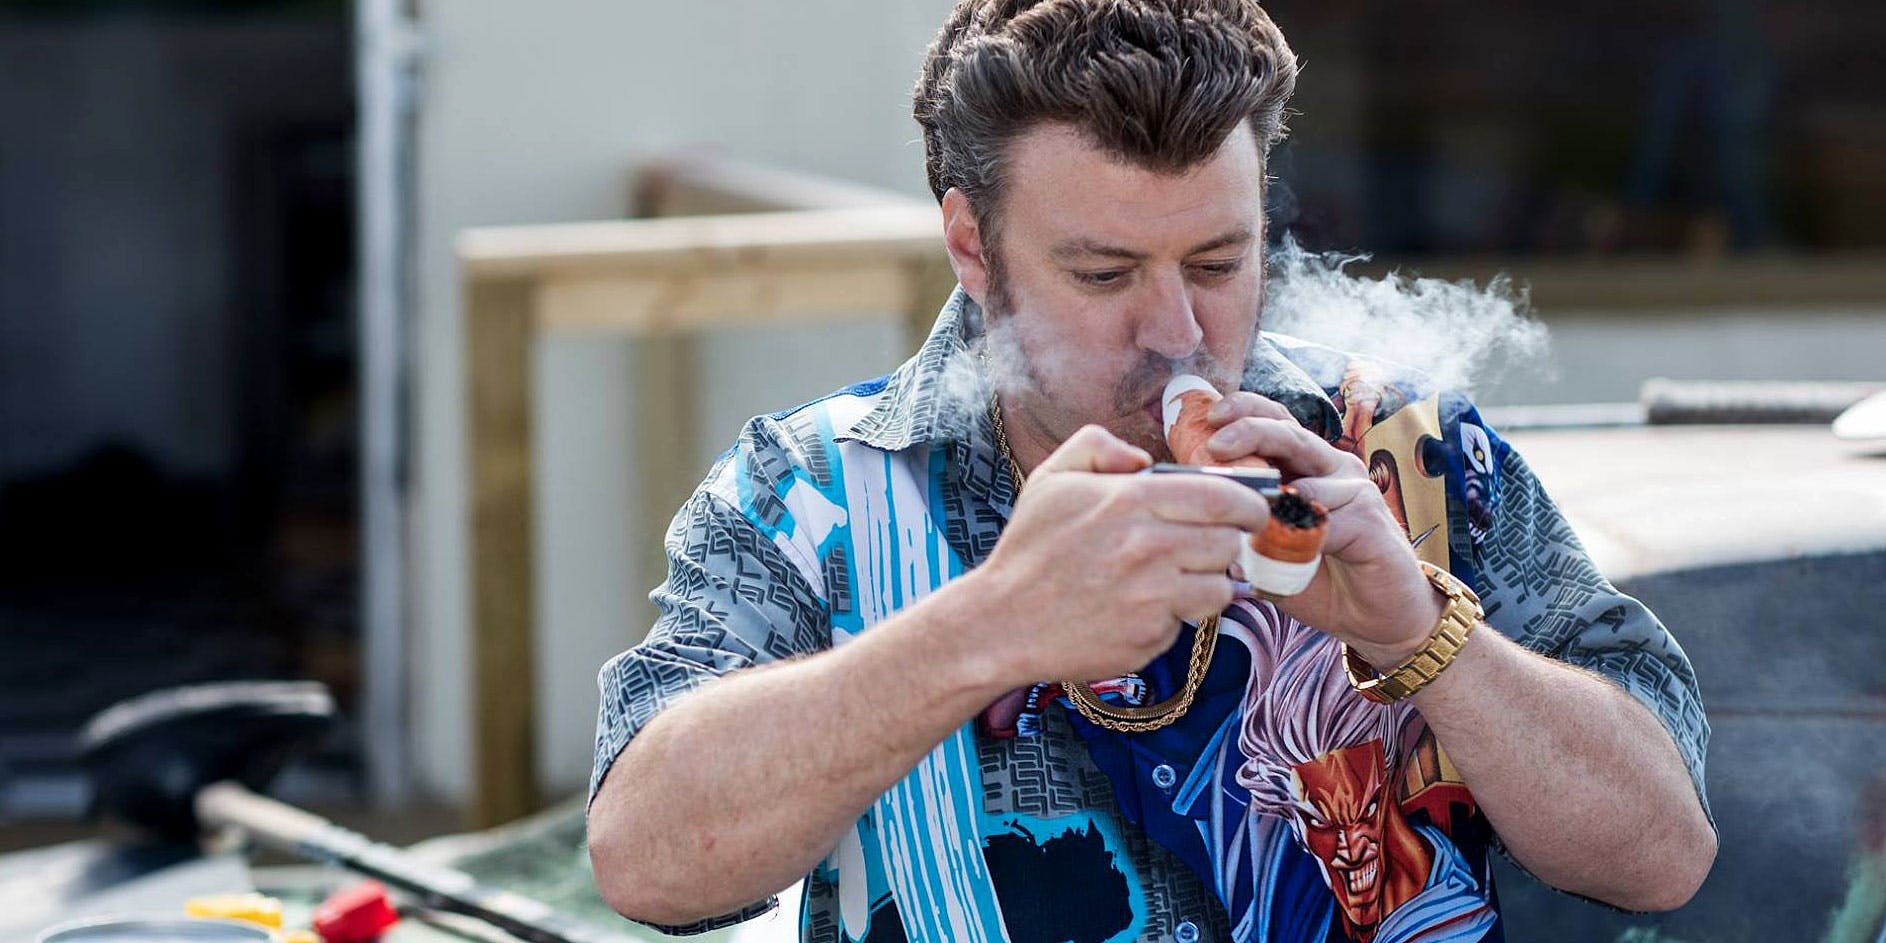 Ricky from Trailer Park Boys hits a bowl